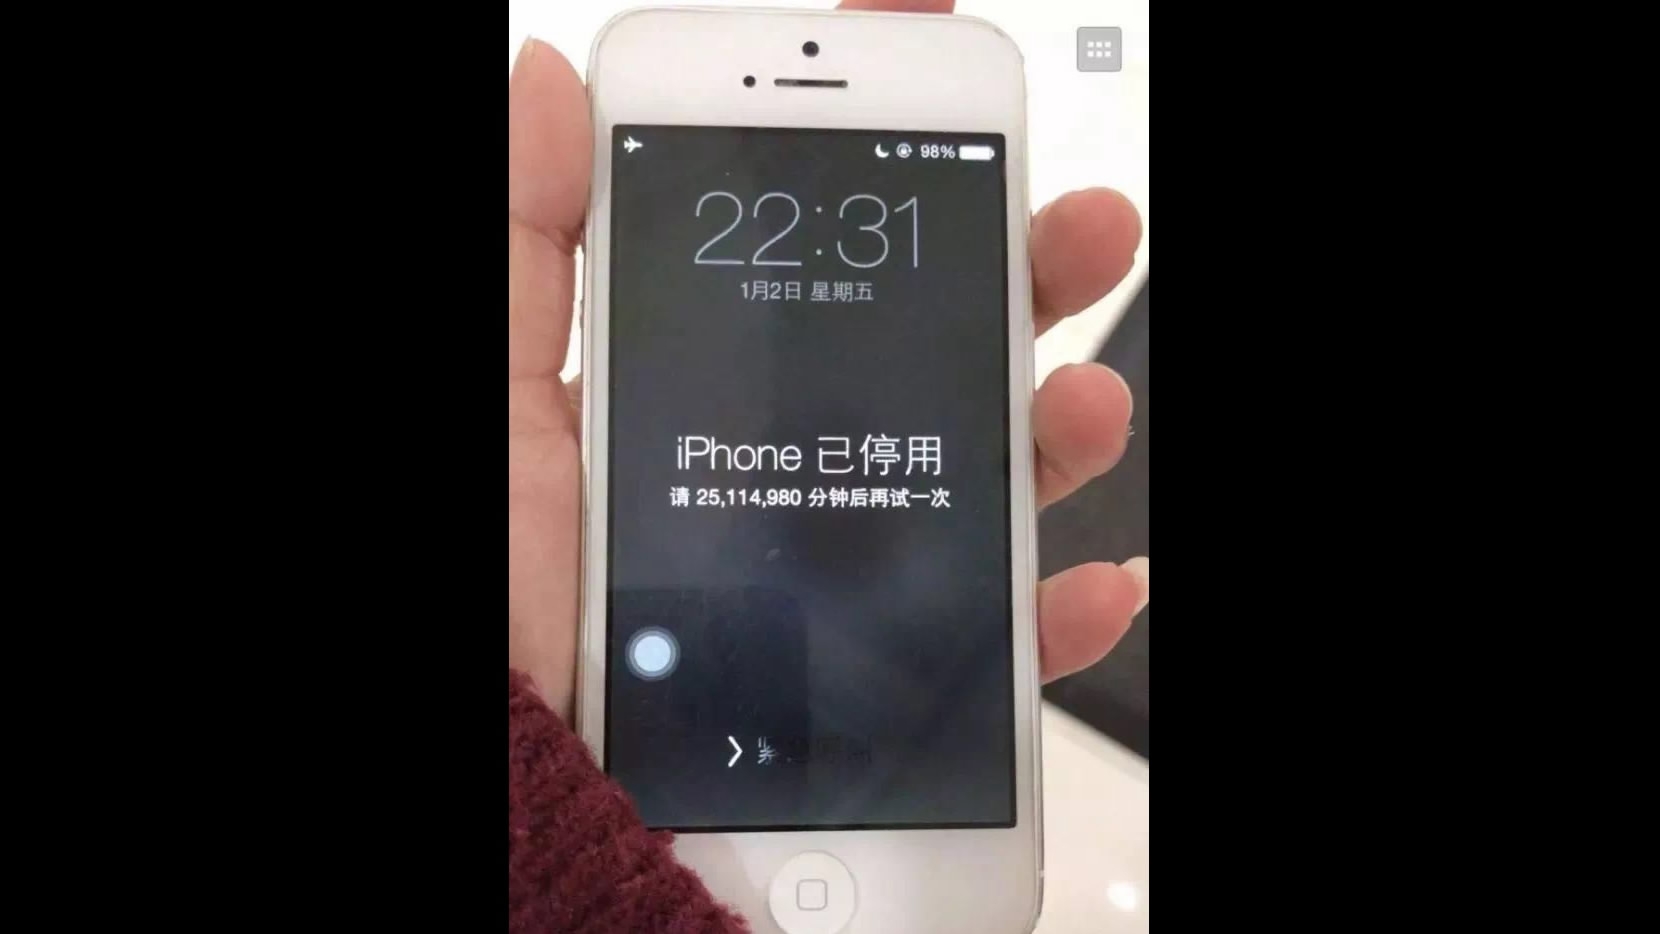 Chinese mom 'locked out' of phone for incredible 47 years